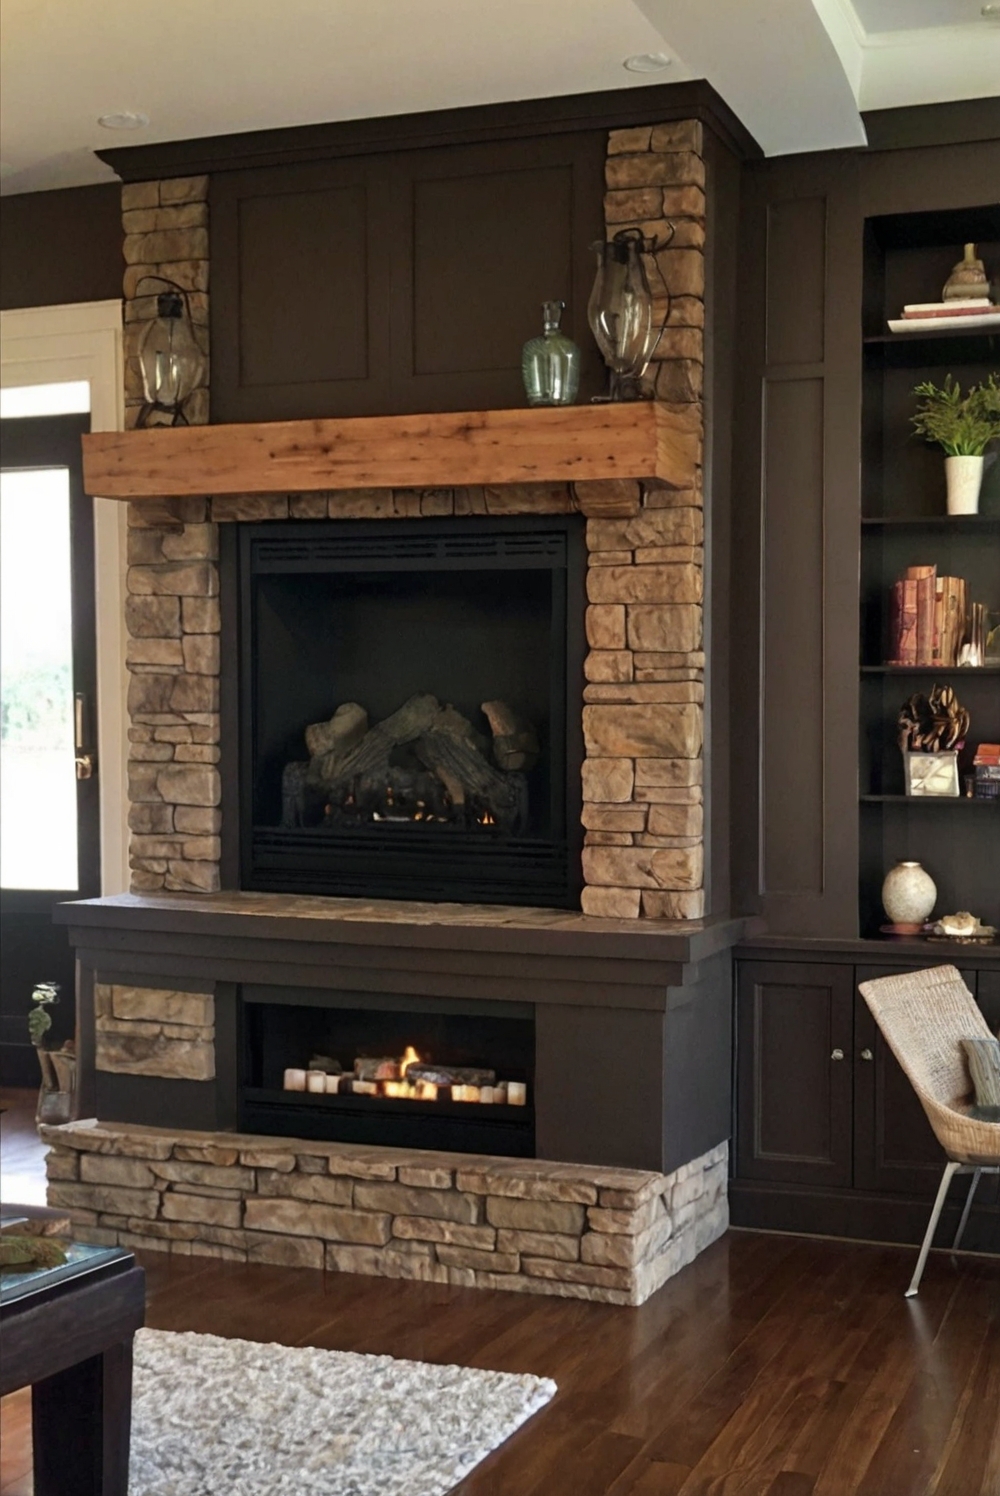 What Are Some Unique Fireplace Mantel Decor Ideas for a Living Room ...